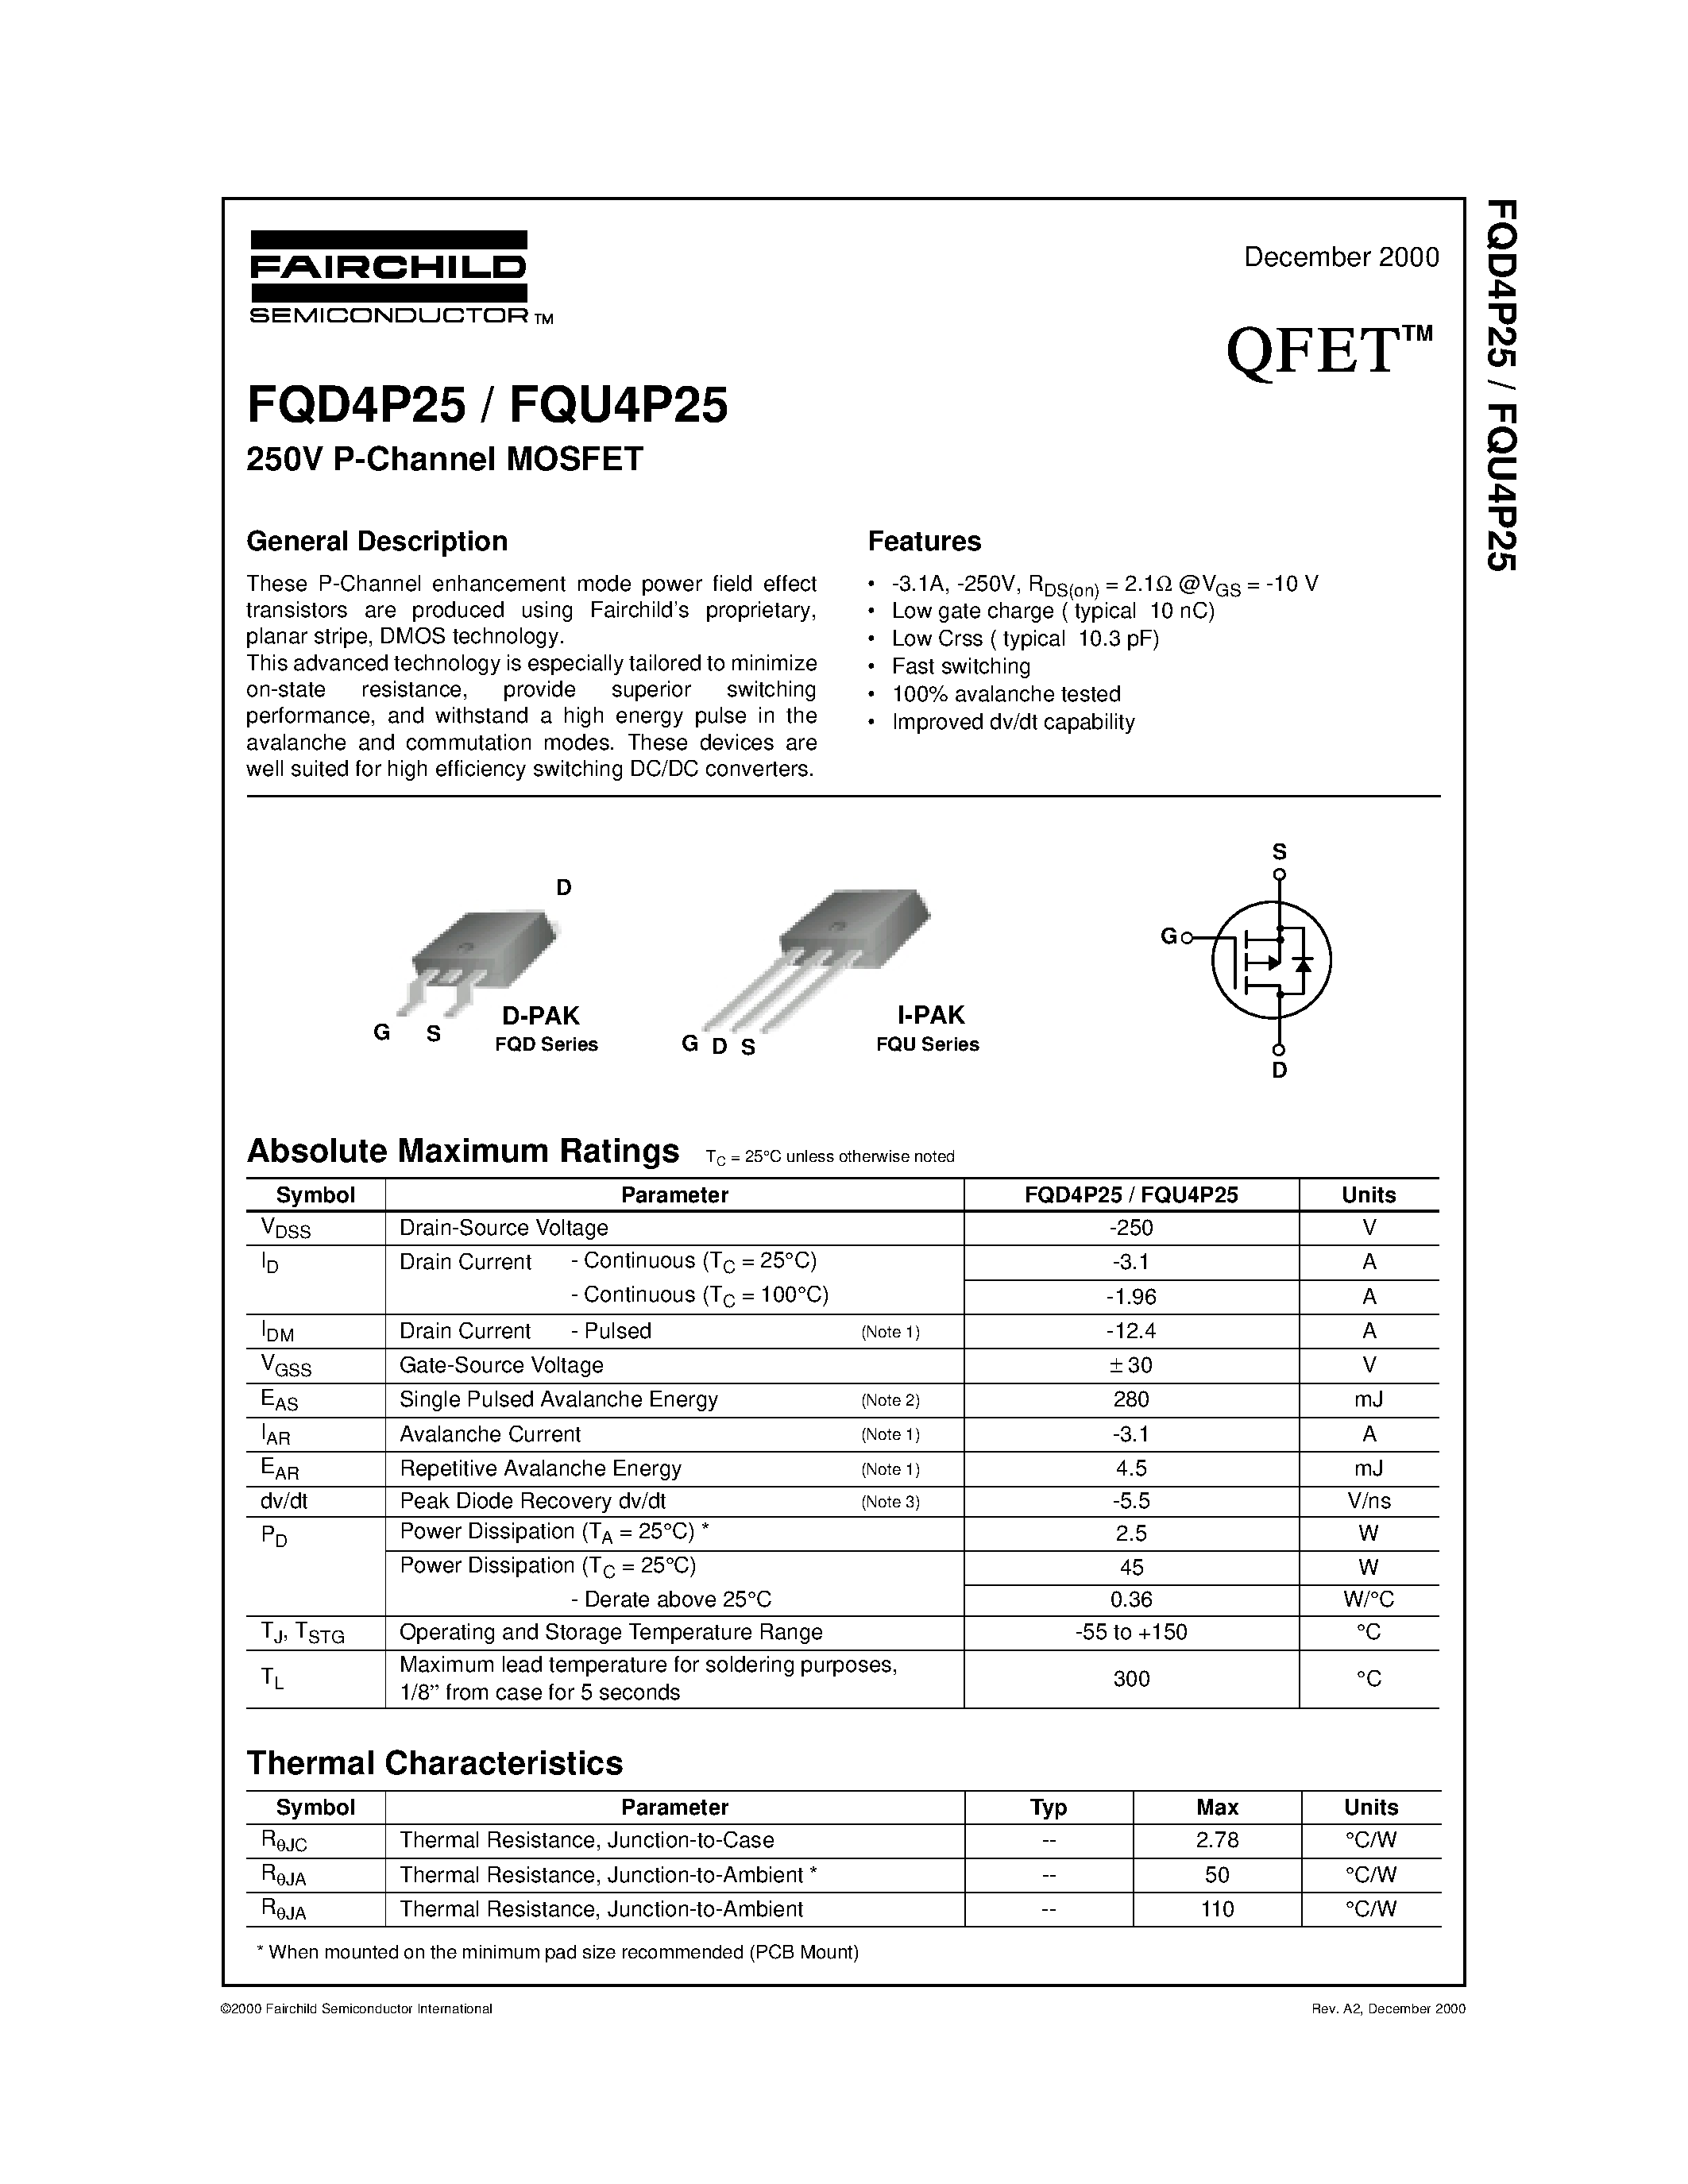 Datasheet FQD4P25 - 250V P-Channel MOSFET page 1